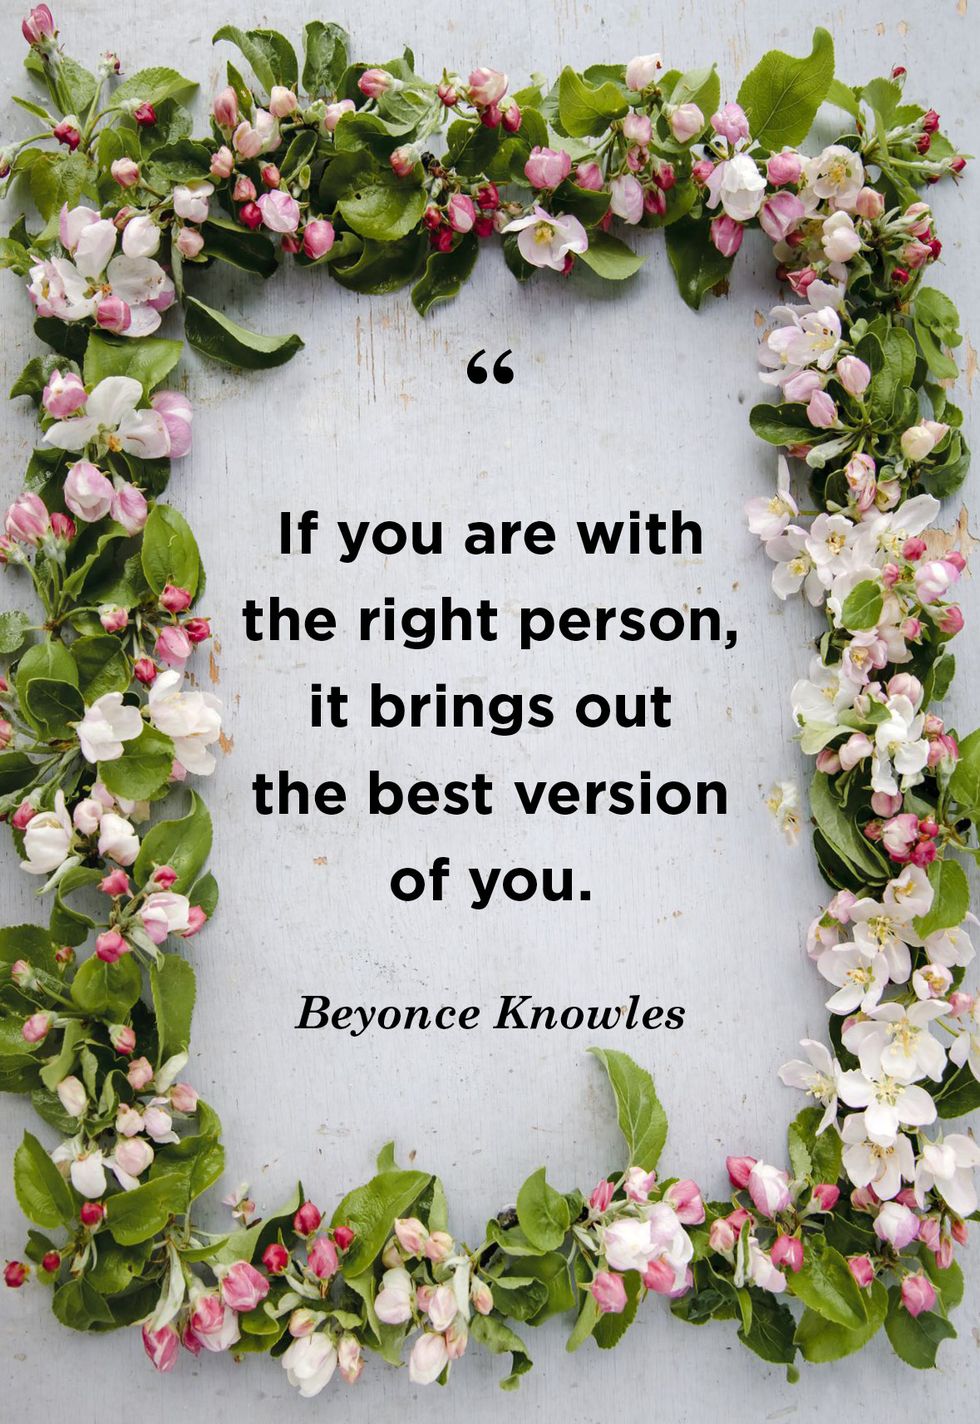 beyonce knowles wedding quote